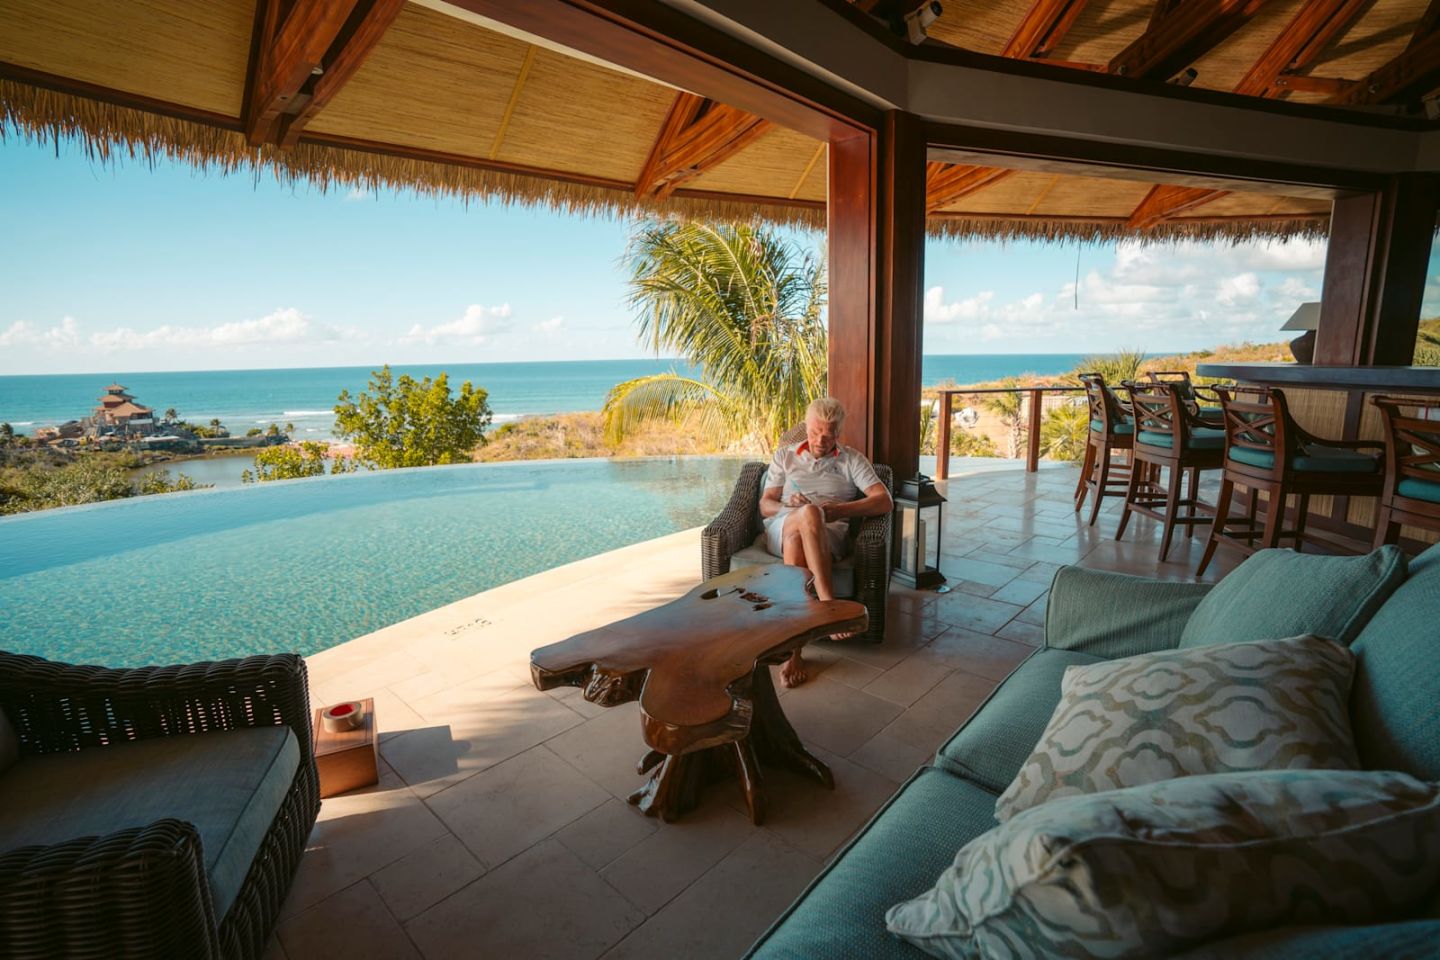 Richard Branson sitting in a chair by the pool on Necker Island writing